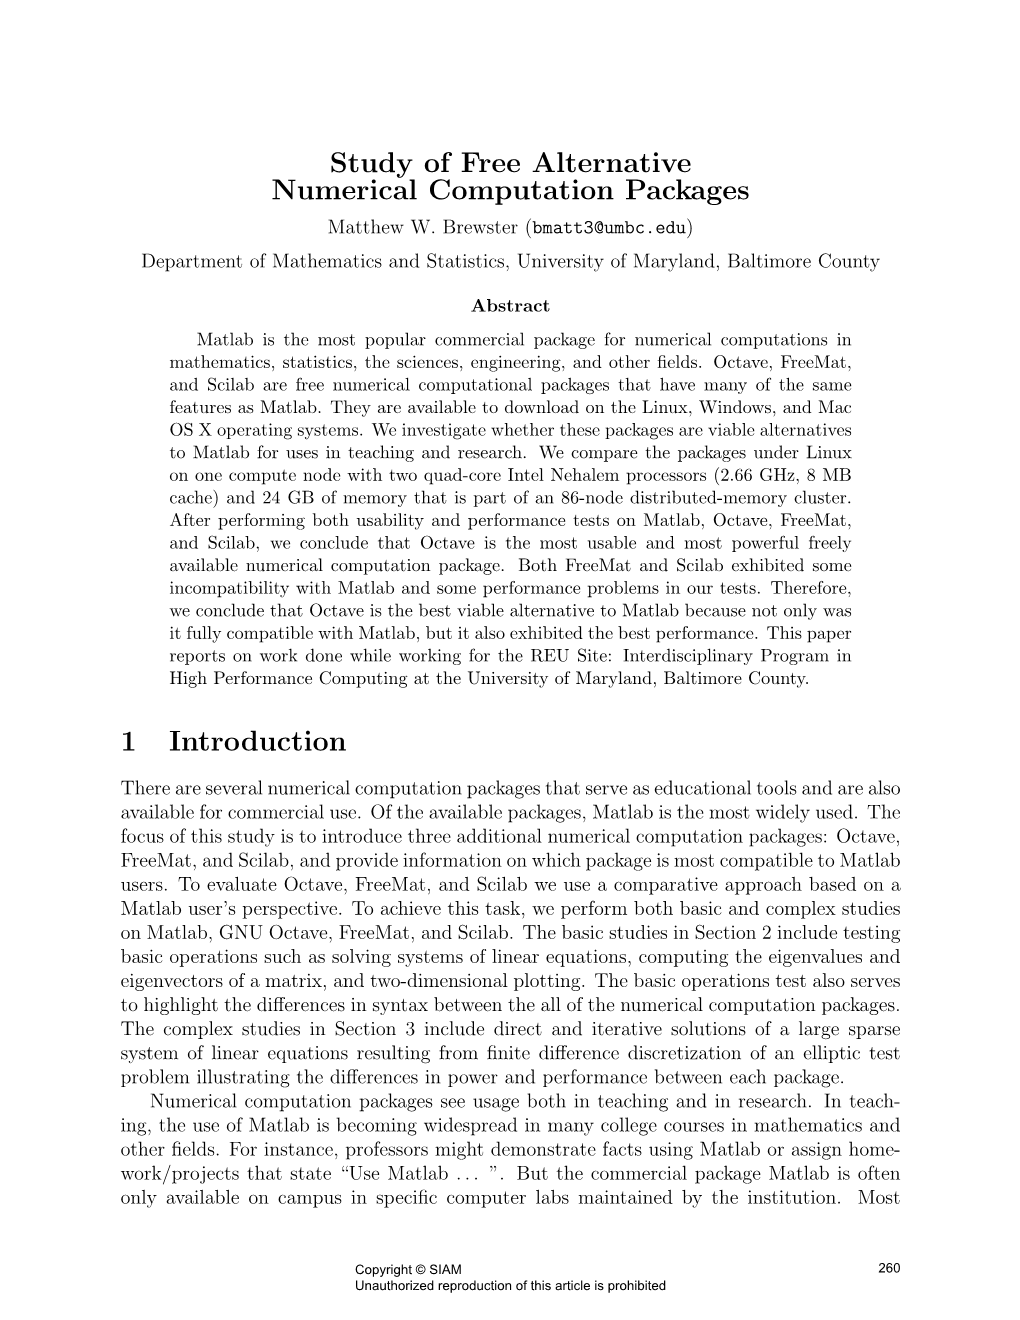 Study of Free Alternative Numerical Computation Packages Matthew W